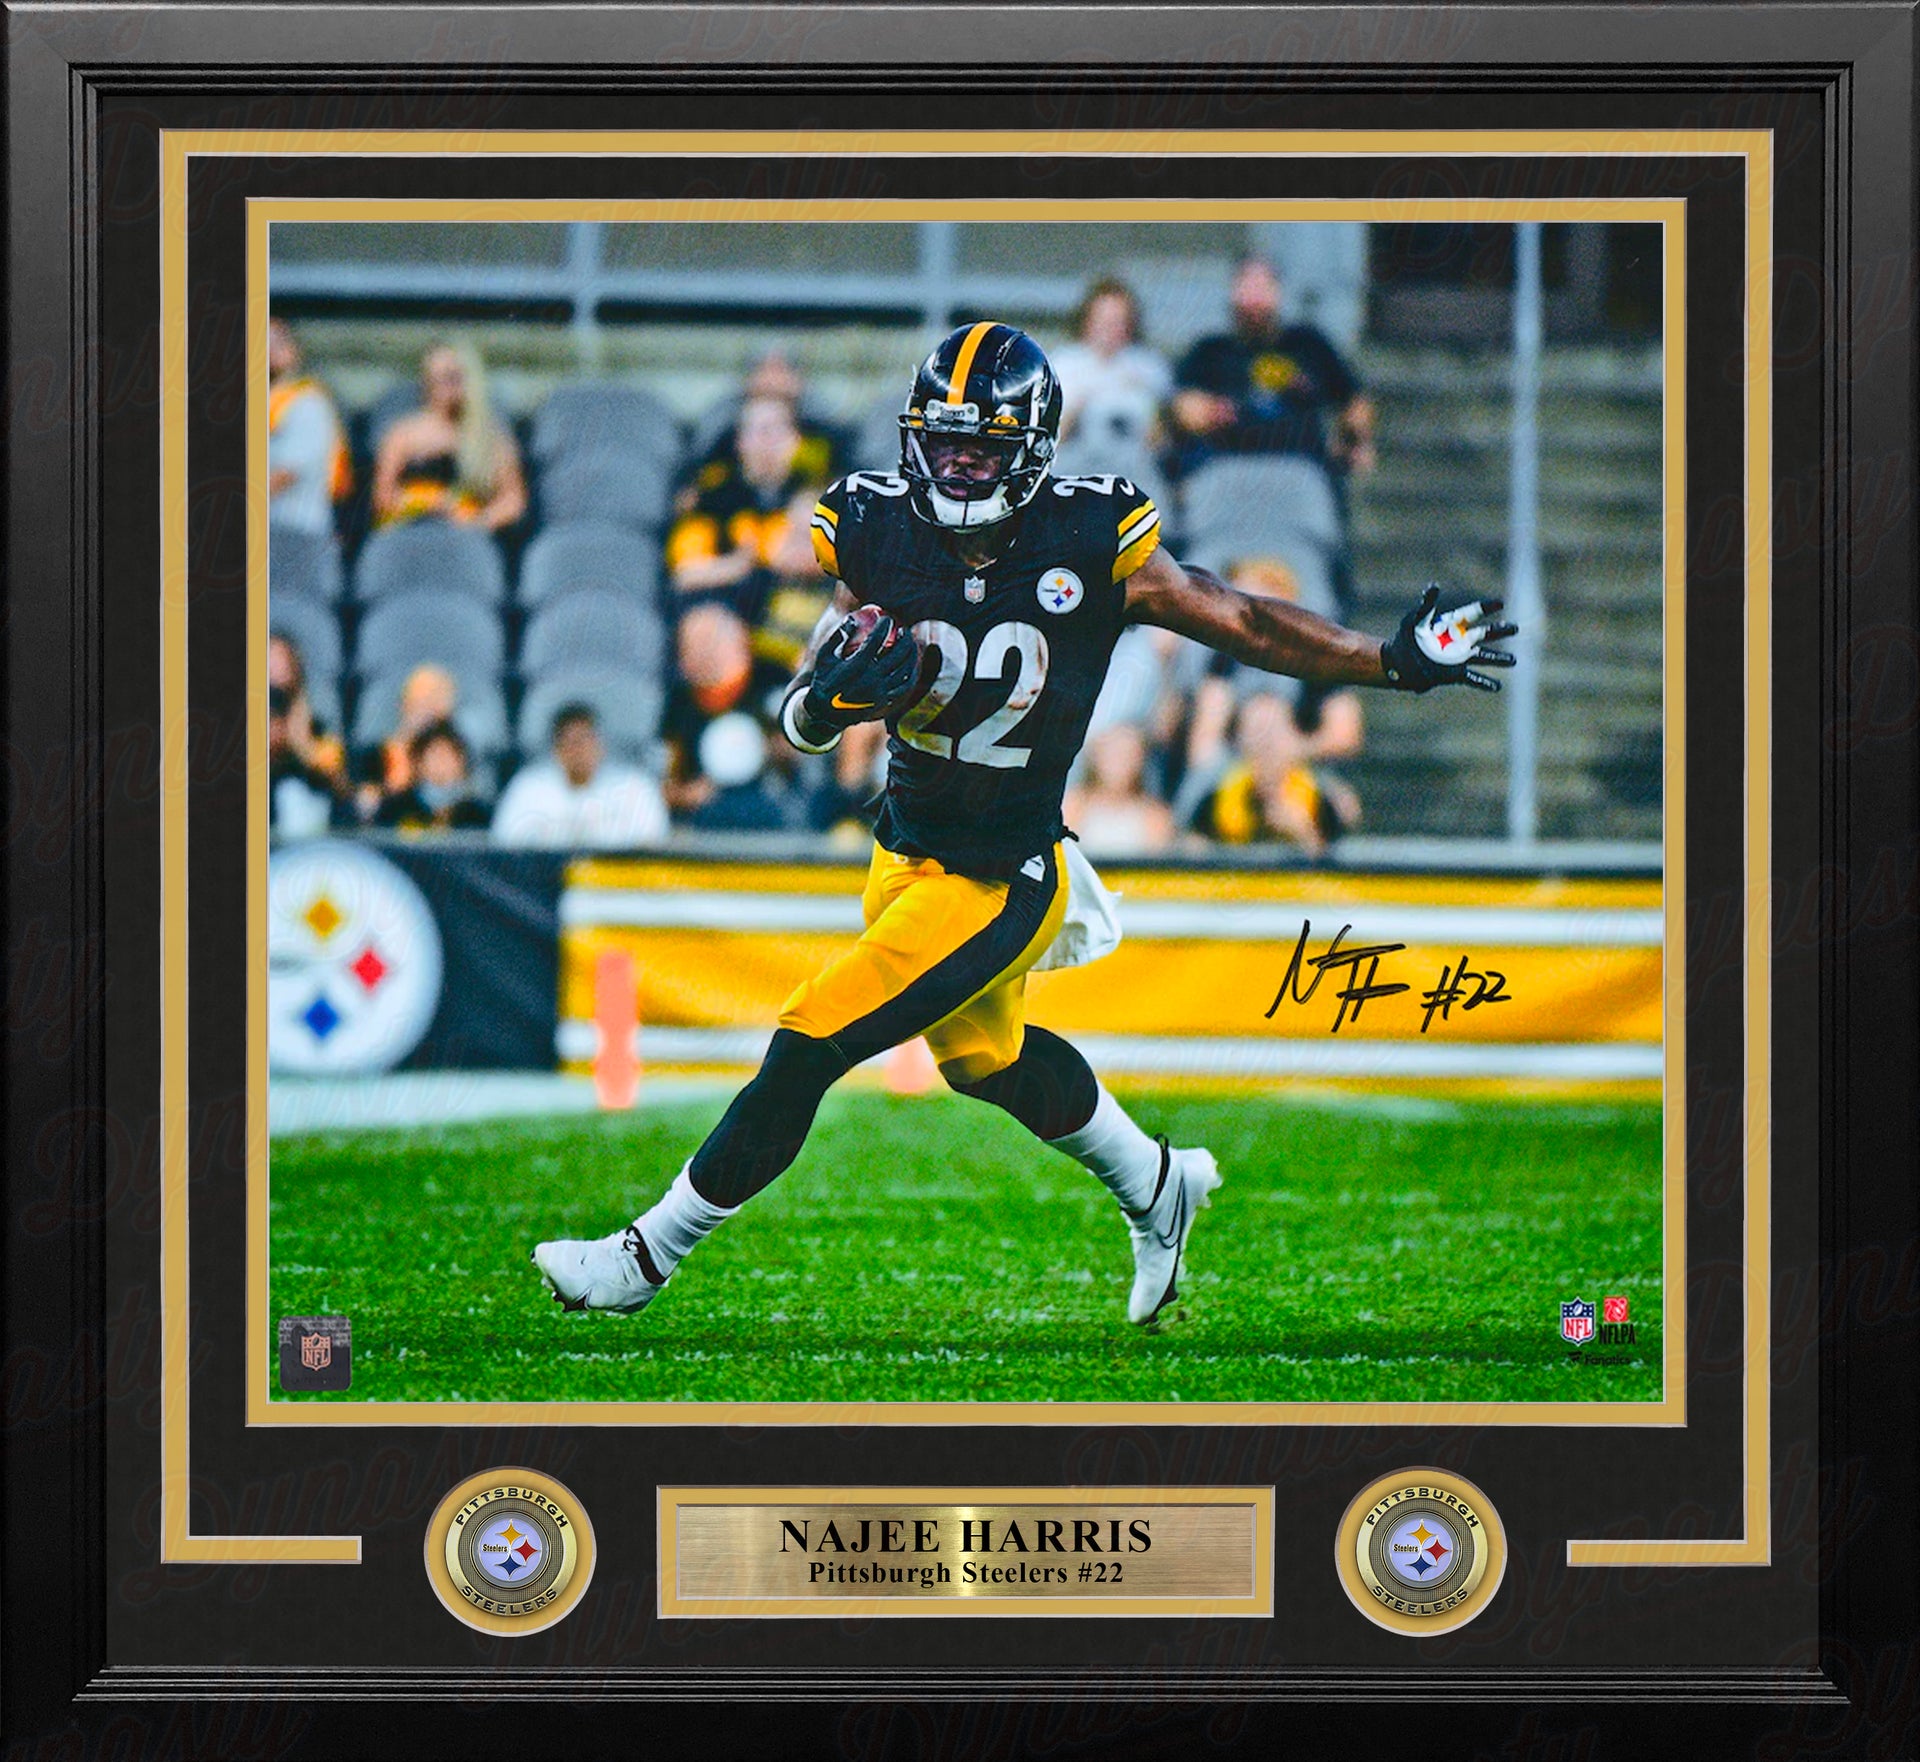 Najee Harris in Action Pittsburgh Steelers Autographed Framed Football Photo - Dynasty Sports & Framing 